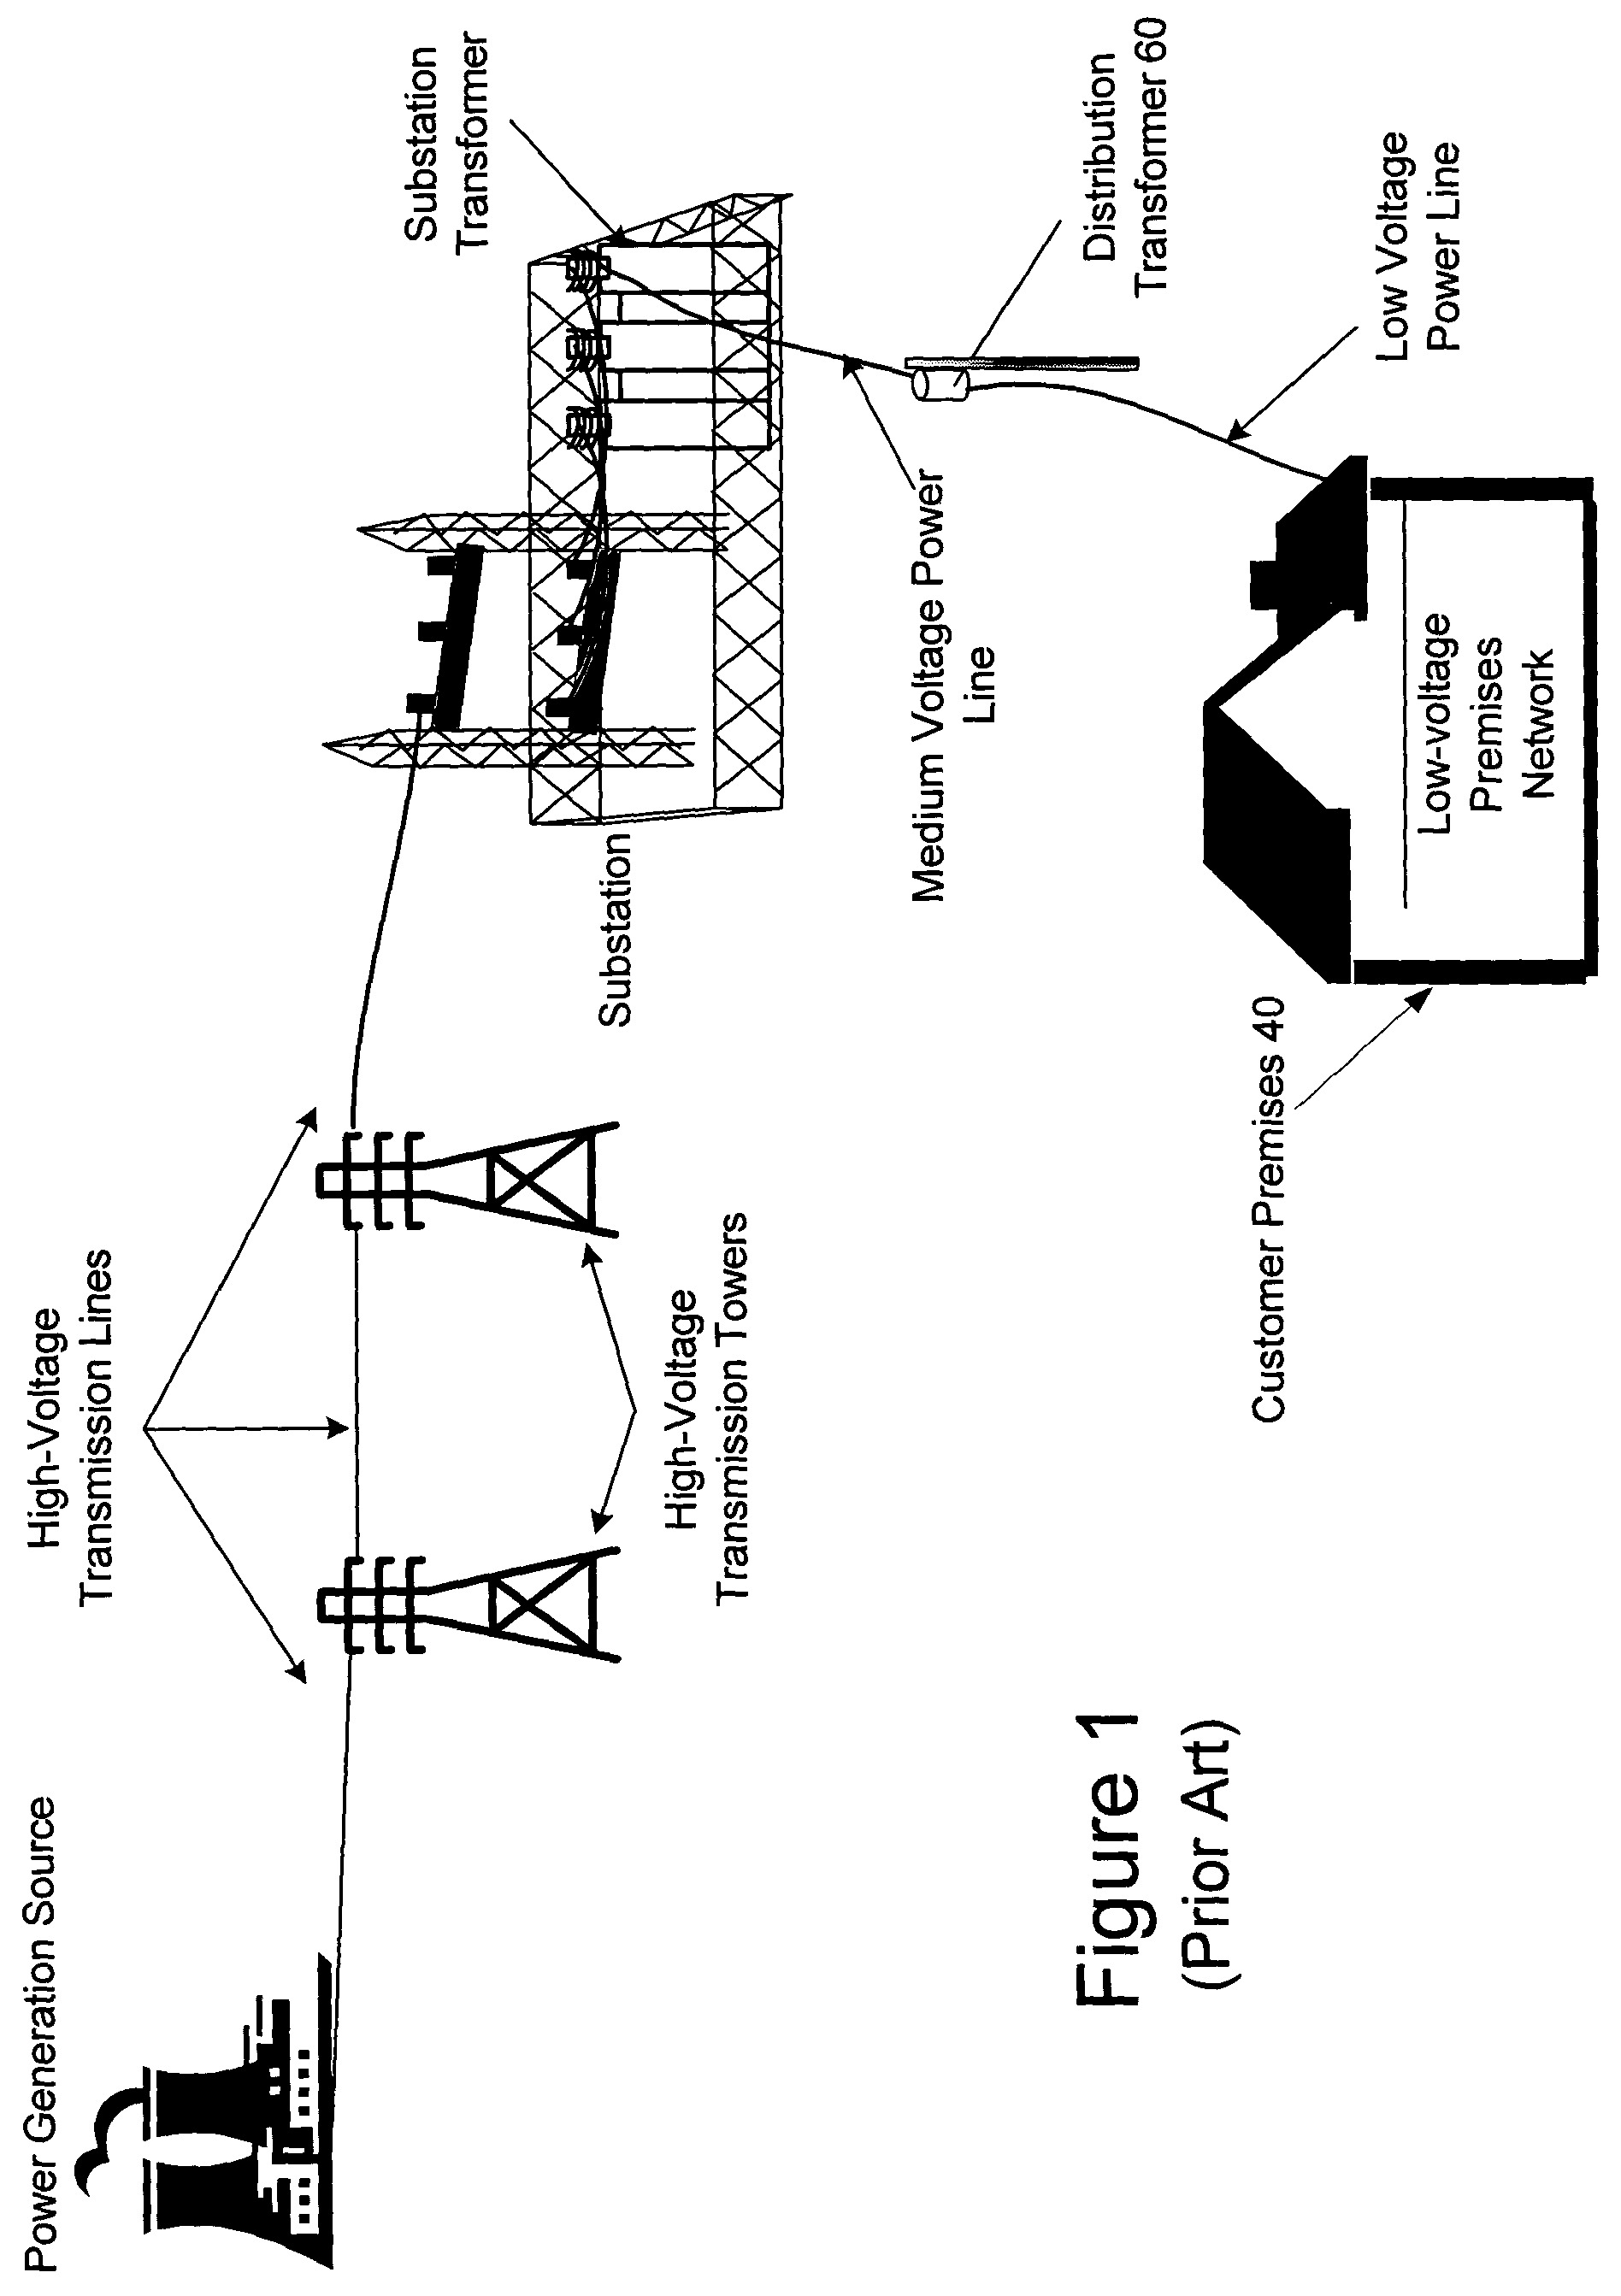 Power line communication system and method of operating the same